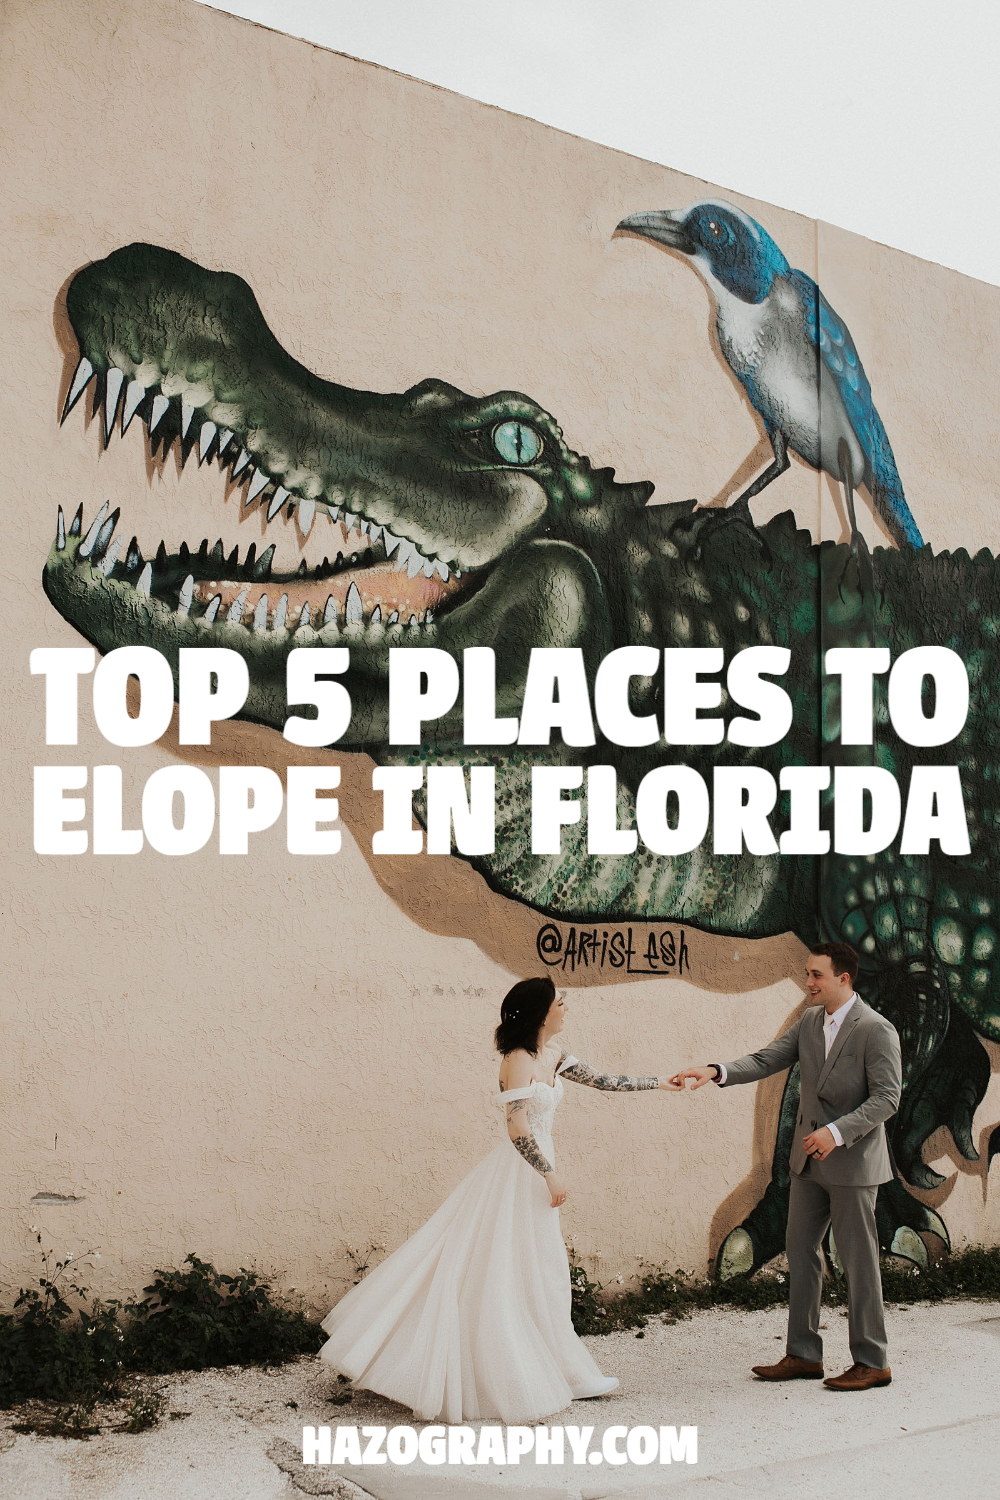 Top 5 Places to Elope in Florida